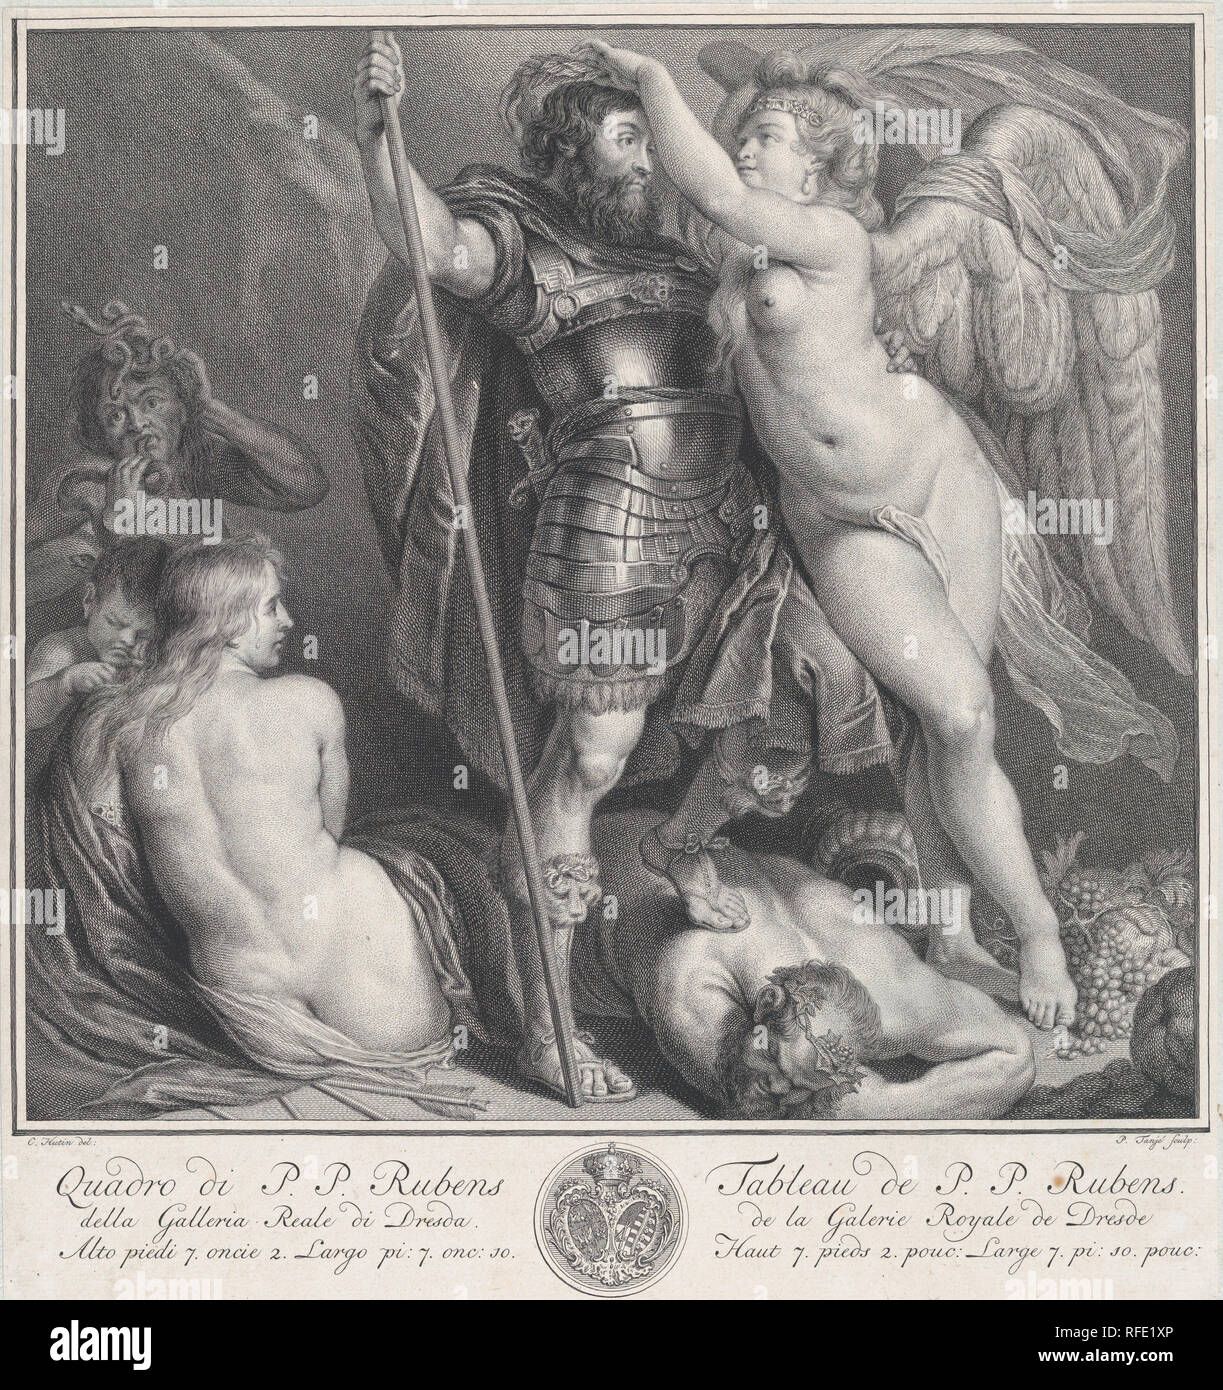 Hero crowned by Victory, who places a laurel wreath on his head, Venus and Cupid at left, Envy at left in the background, Silenus on the ground, under the hero's foot. Artist: After Peter Paul Rubens (Flemish, Siegen 1577-1640 Antwerp); Pieter Tanjé (Dutch, Bolsward 1706-1761 Amsterdam); Intermediary draftsman Charles Hutin (French, Paris 1715-1776 Dresden). Dimensions: Sheet (Trimmed): 6 7/16 × 8 11/16 in. (16.4 × 22 cm). Date: ca. 1735-61. Museum: Metropolitan Museum of Art, New York, USA. Stock Photo